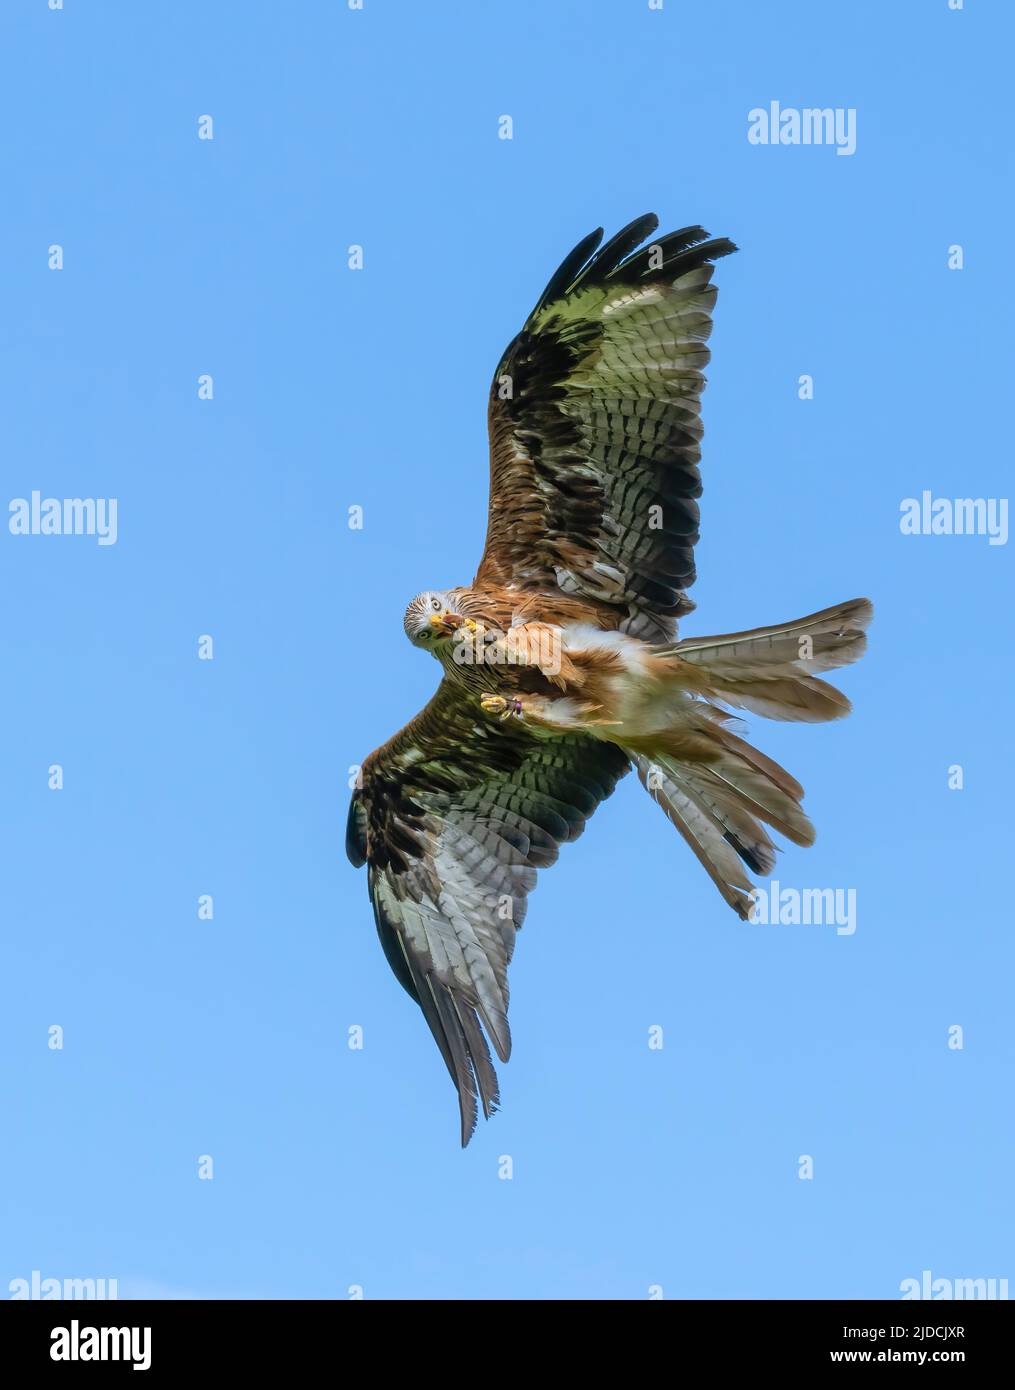 A magnificent Red Kite (Milvus milvus) in flight. Photographed in Haworth, West Yorkshire, UK Stock Photo